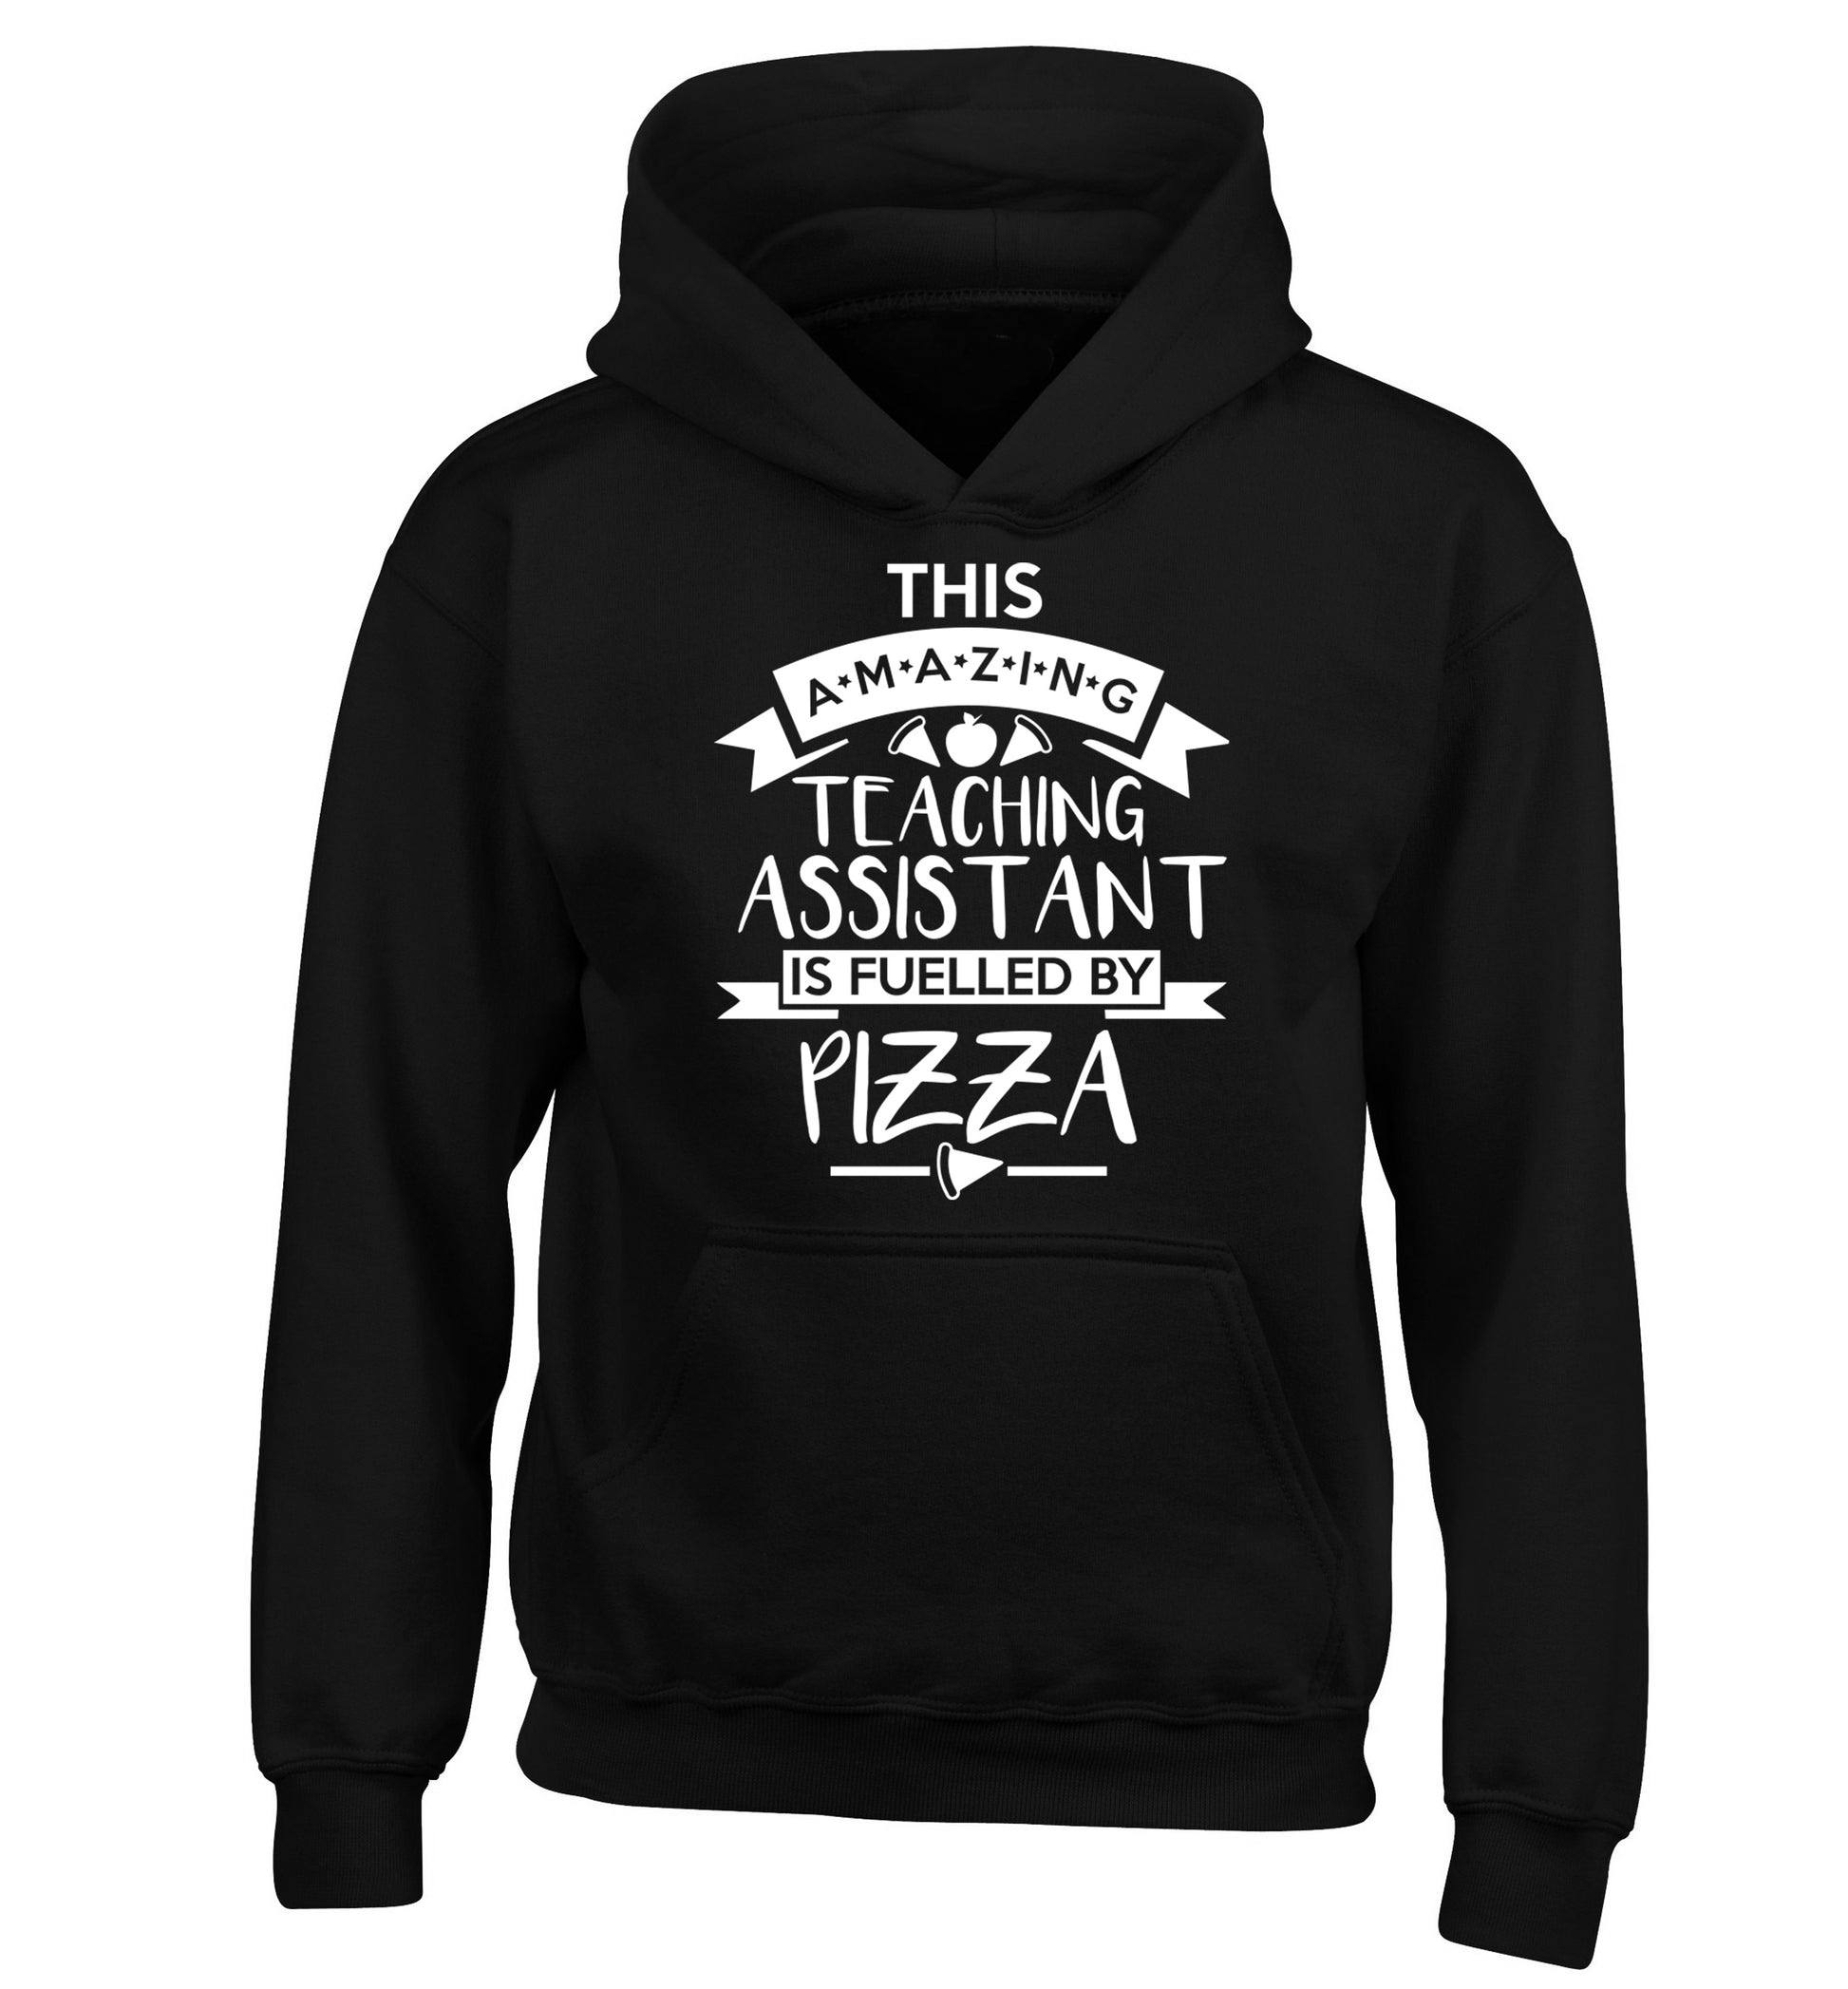 This amazing teaching assistant is fuelled by pizza children's black hoodie 12-13 Years